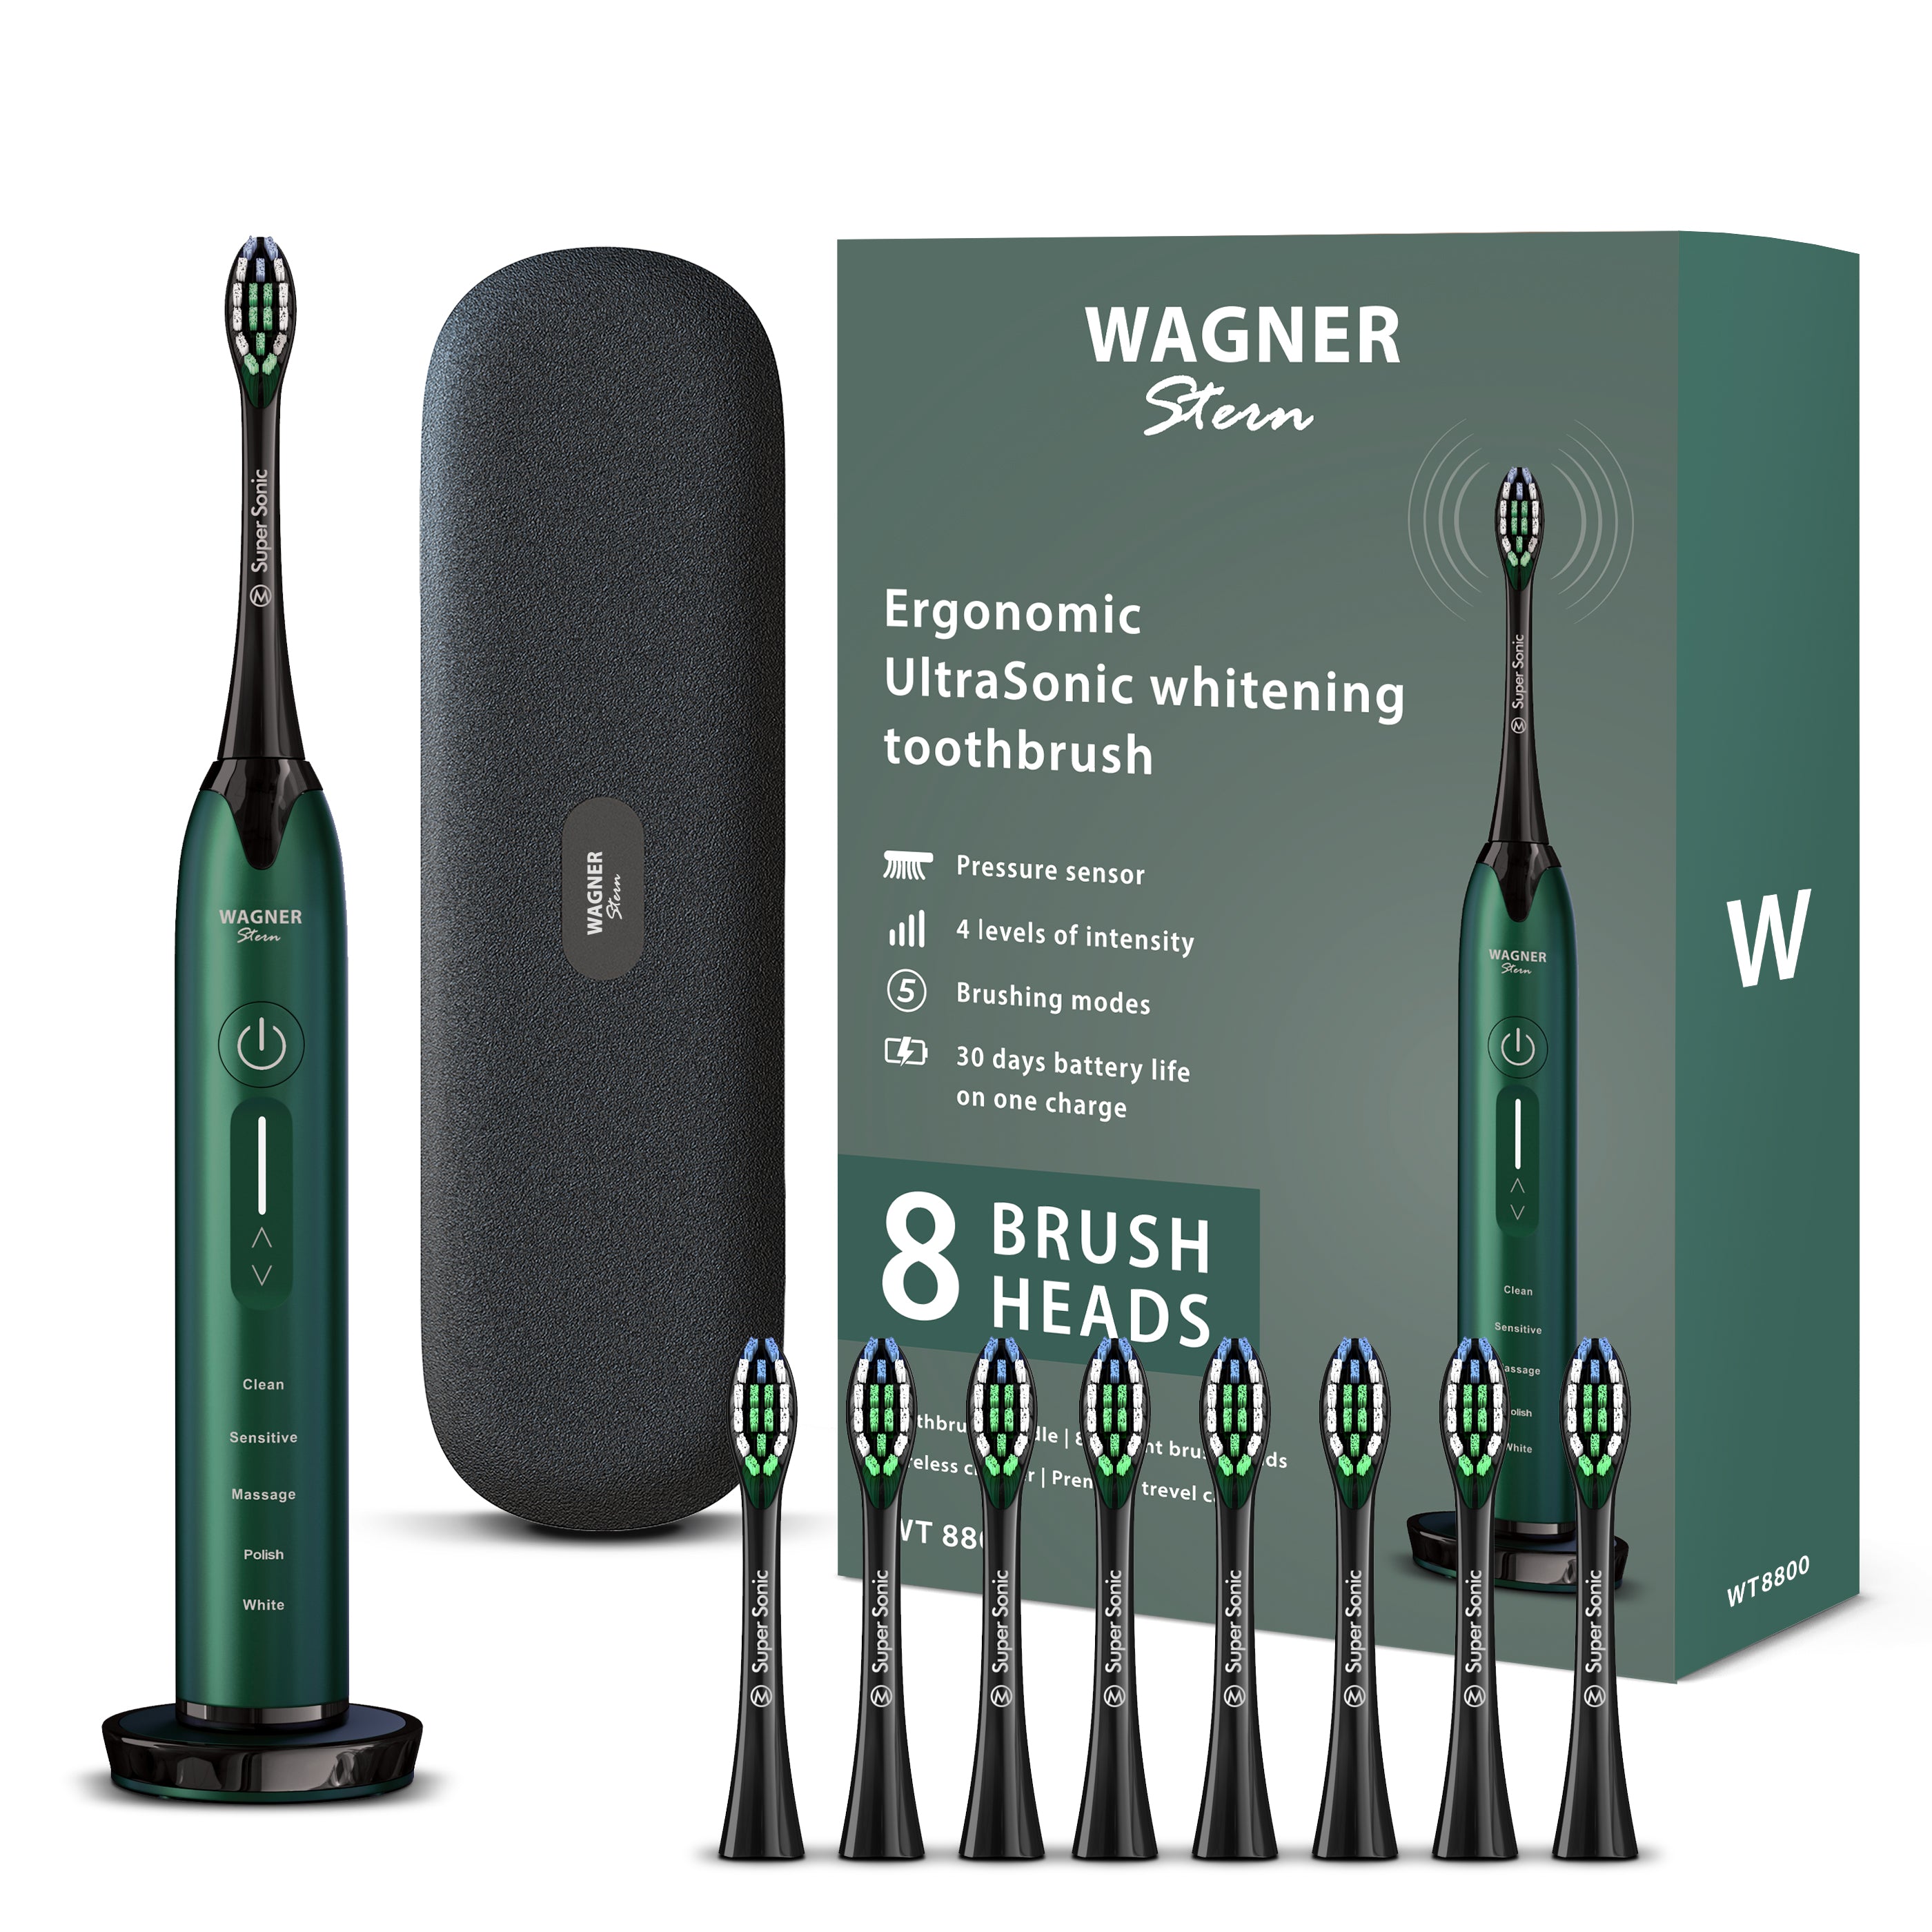 Wagner & Stern Ultrasonic whitening Toothbrush with Pressure Sensor. 5 Brushing Modes and 4 Intensity Levels with 3D Sliding Control, 8 Dupont Bristles, Premium Travel Case.